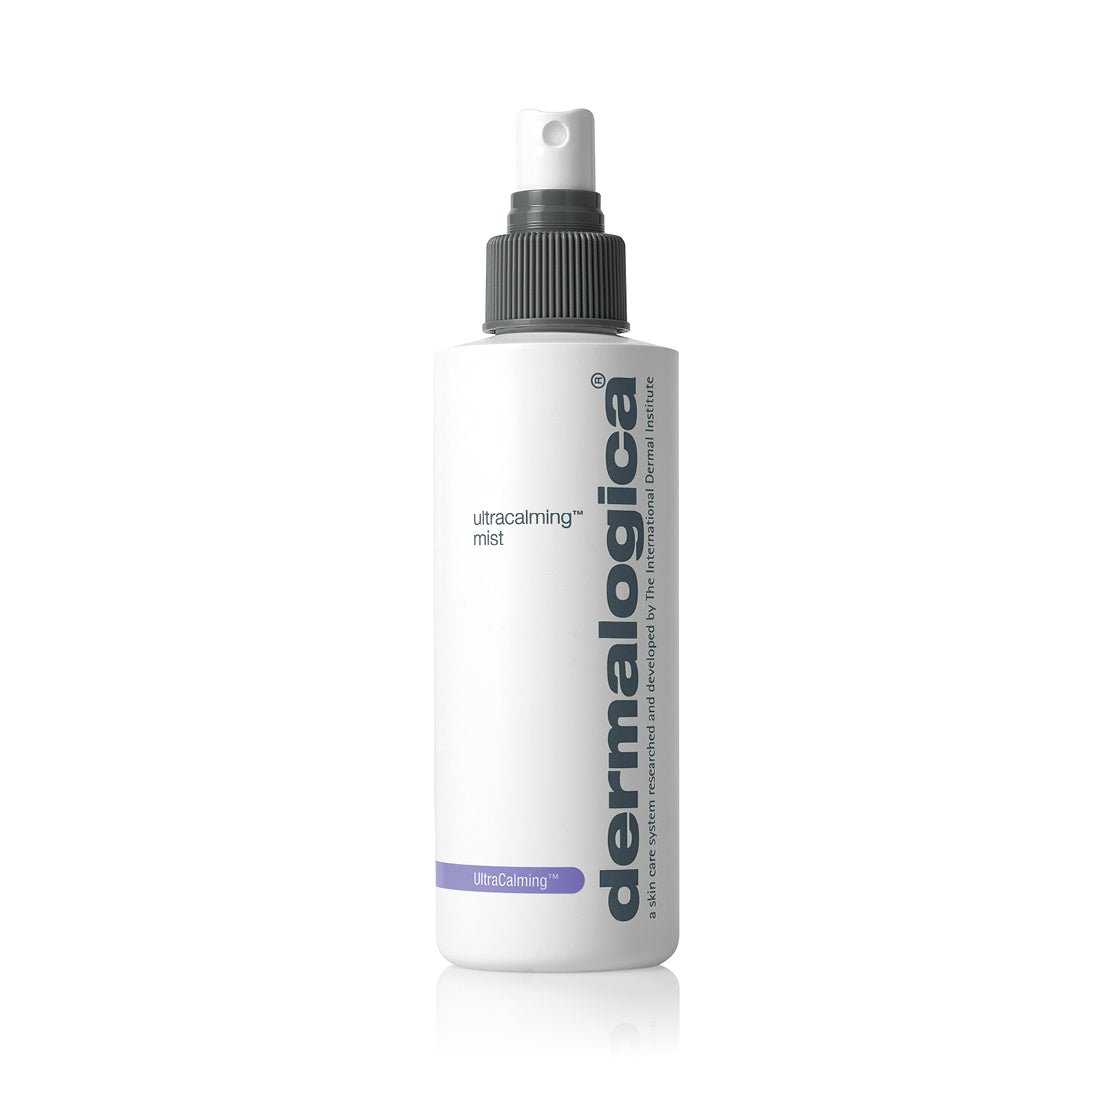 Dermalogica Ultracalming Mist - Heaven Therapy Skincare (7174229065888)